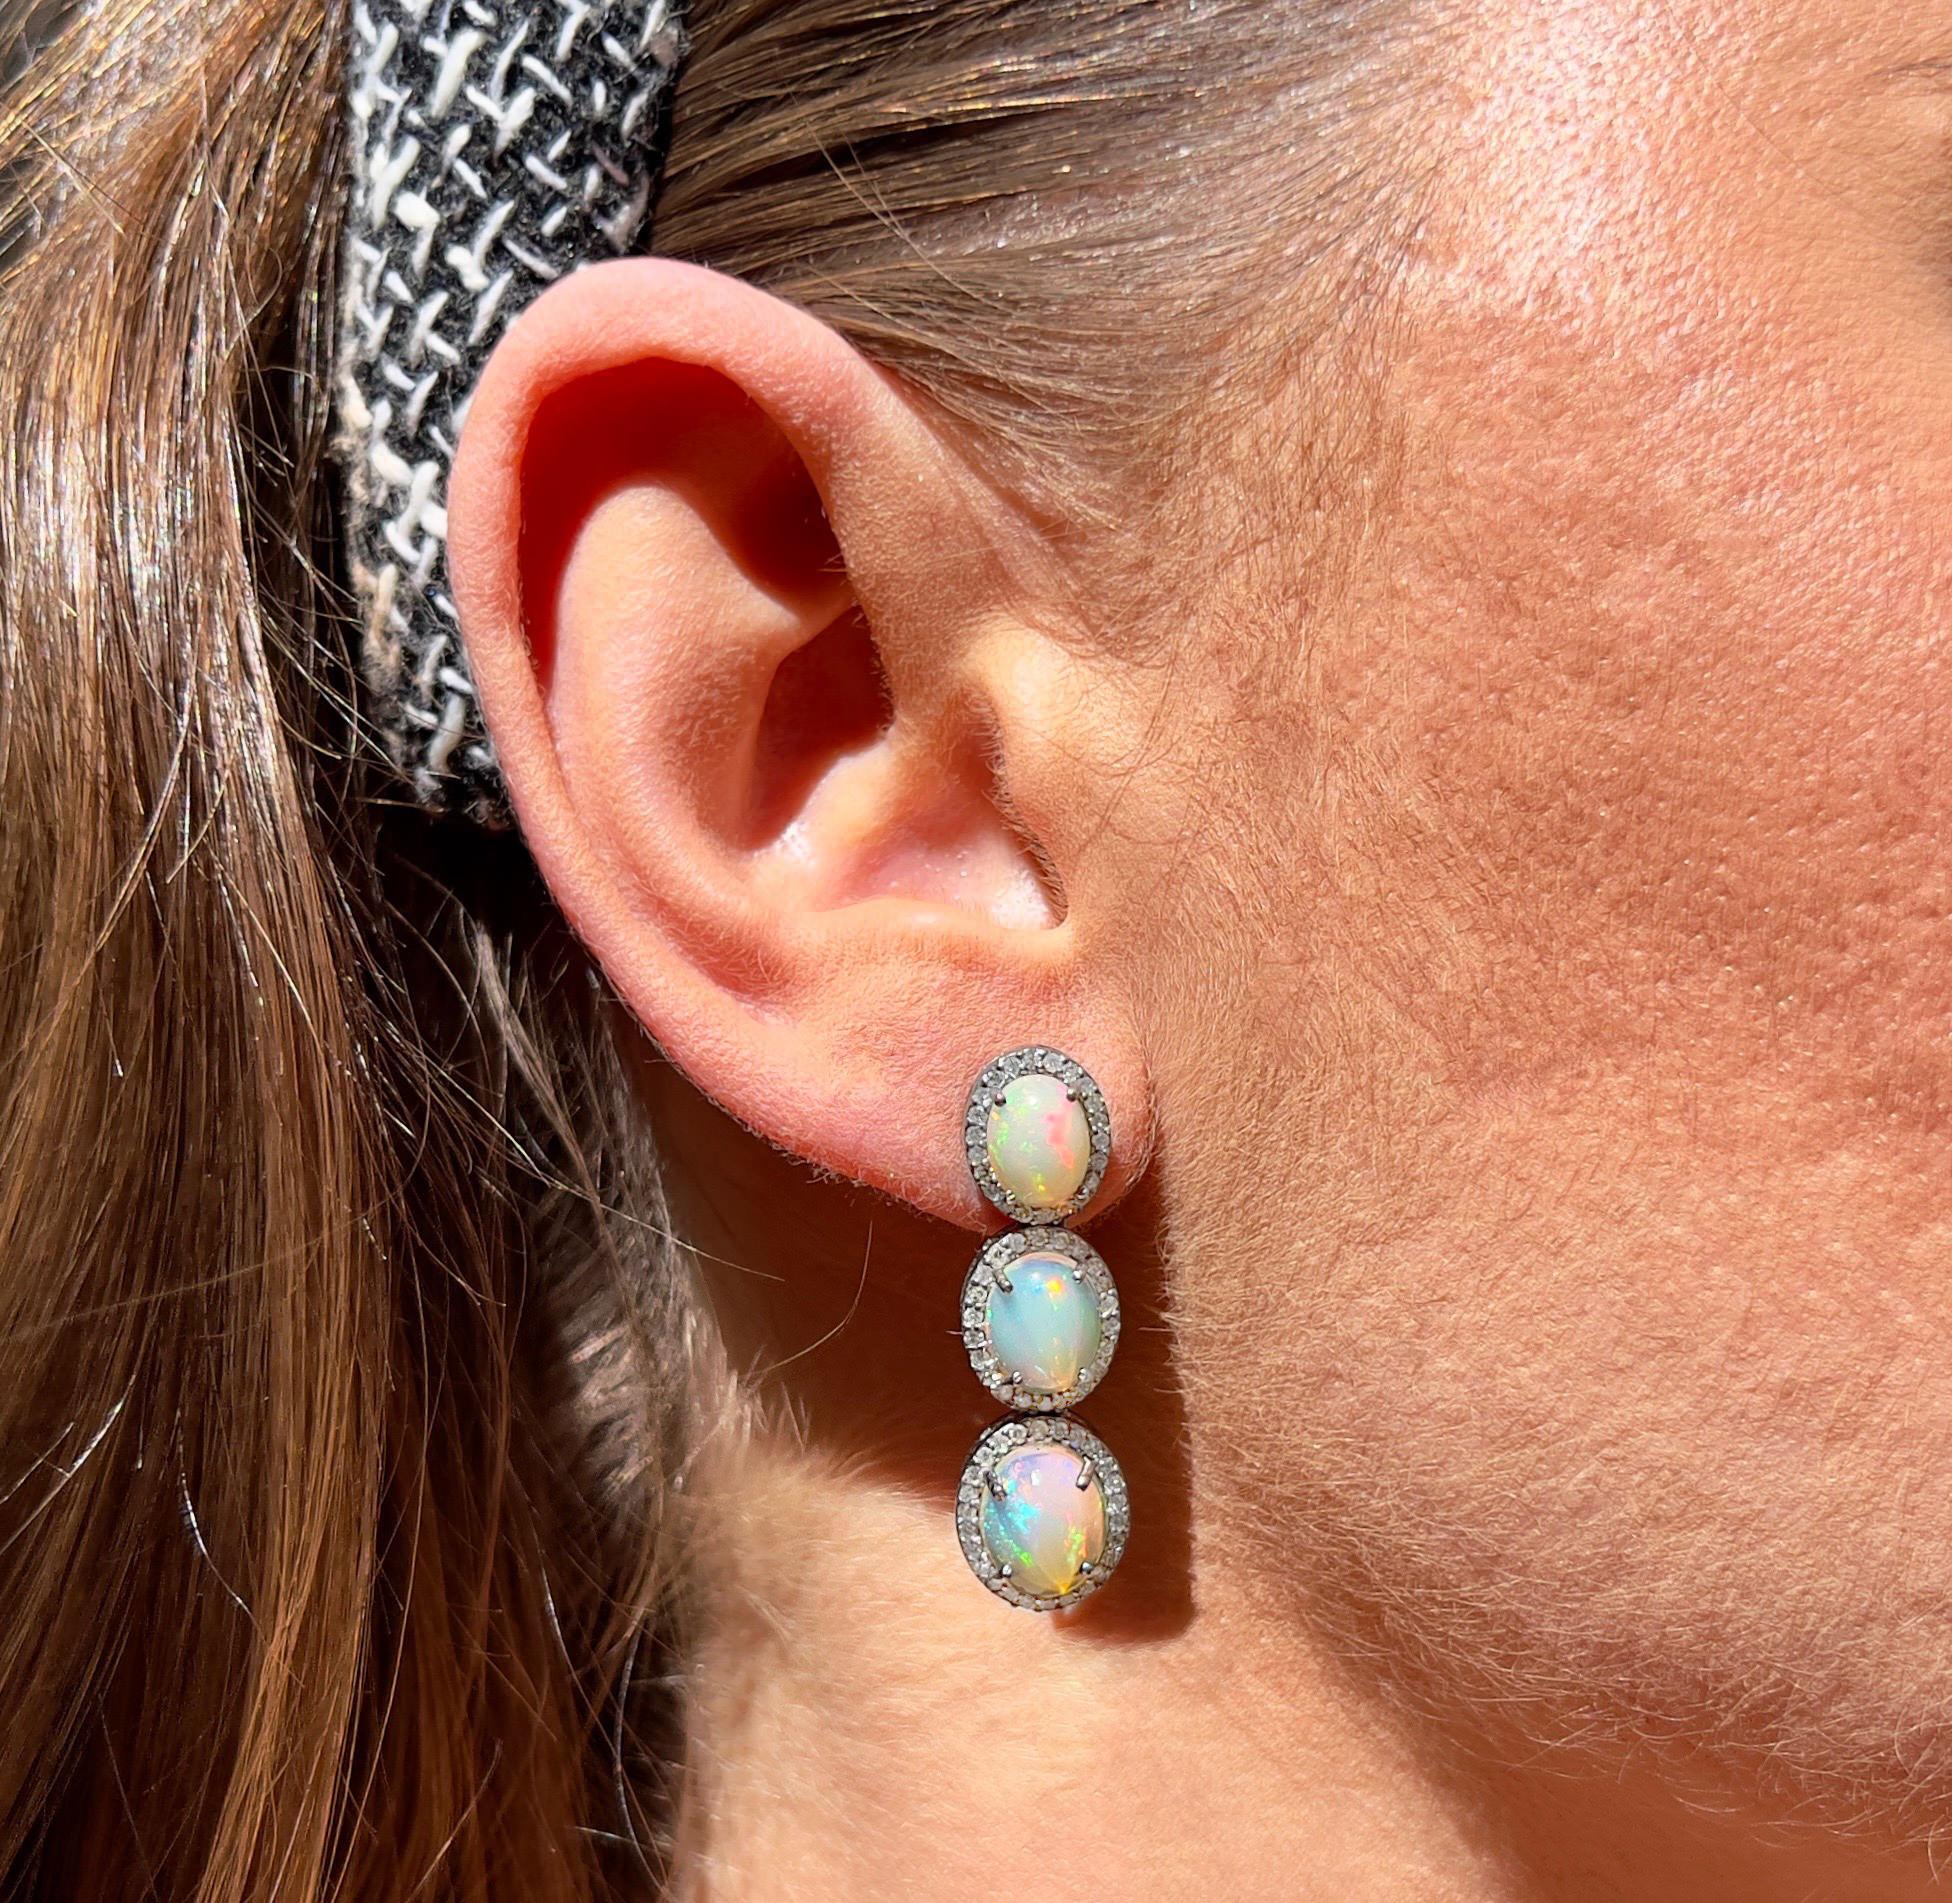 It comes with the appraisal by GIA GG/AJP
Condition: Excellent
Opals =  8 Carats
Diamonds = 1.02 Carats
(Color: F-J, Clarity: VS-I)
Metal: Silver & 14K Yellow Gold
Earrings Length: 1.42 Inches
Earrings Width: 0.42 Inches